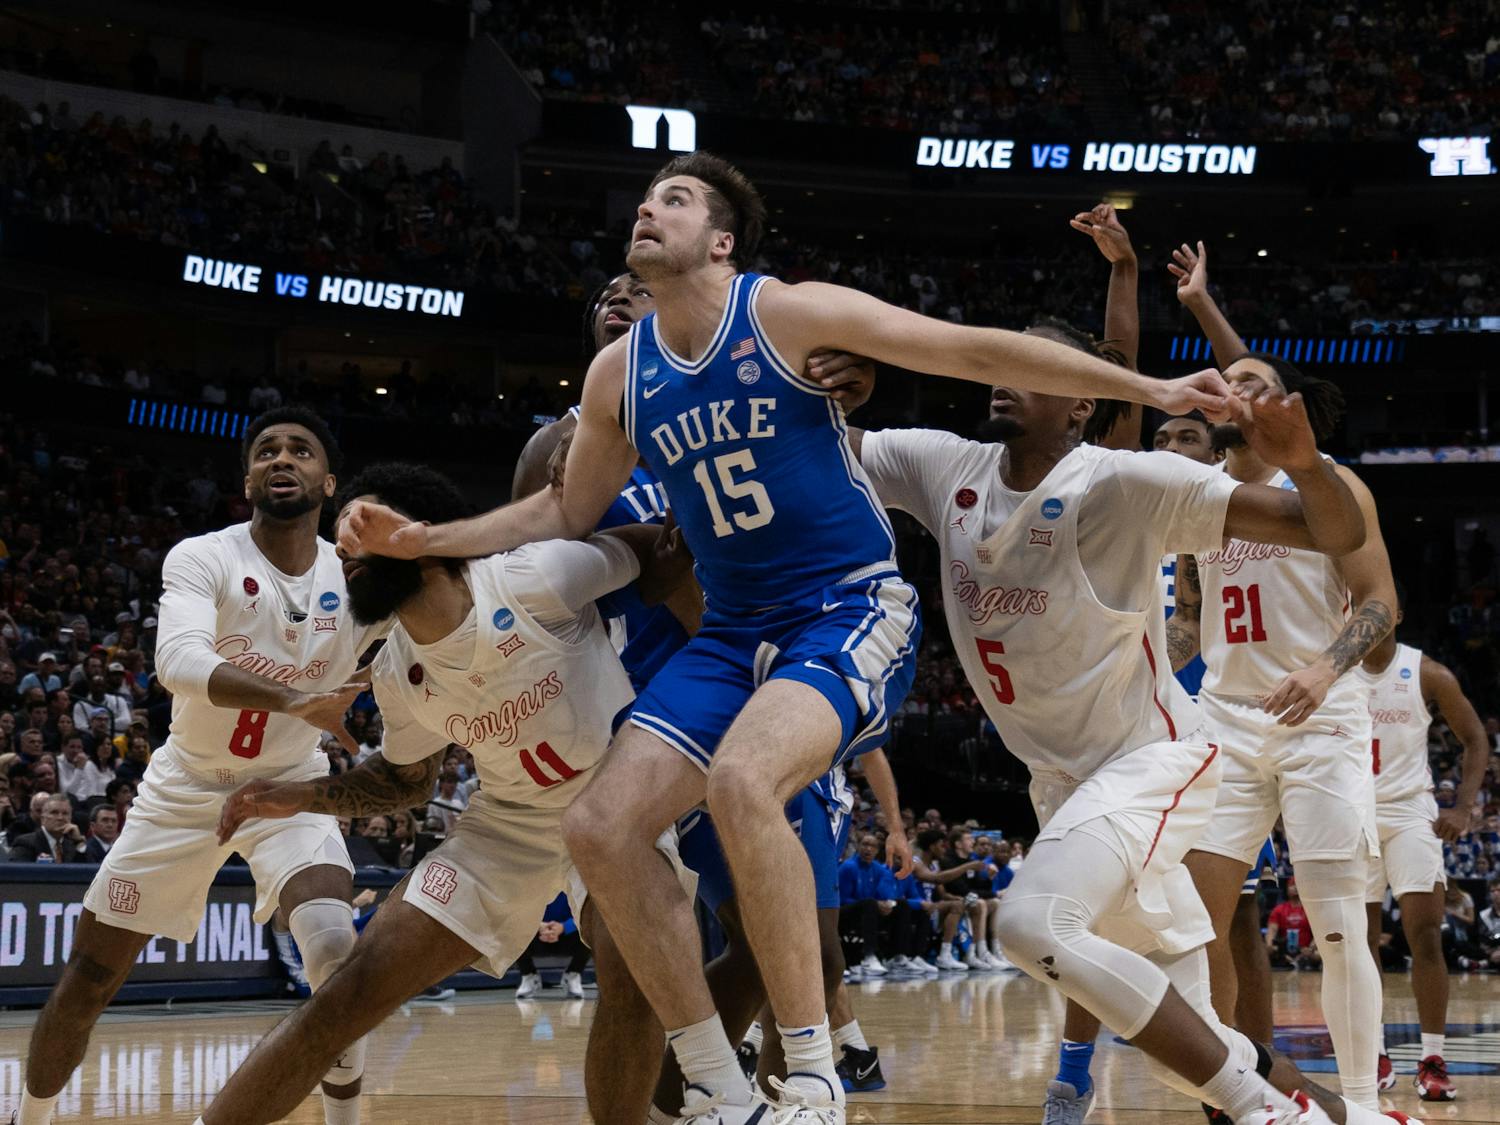 Ryan Young boxes out under the basket in Duke's Sweet 16 victory against Houston.